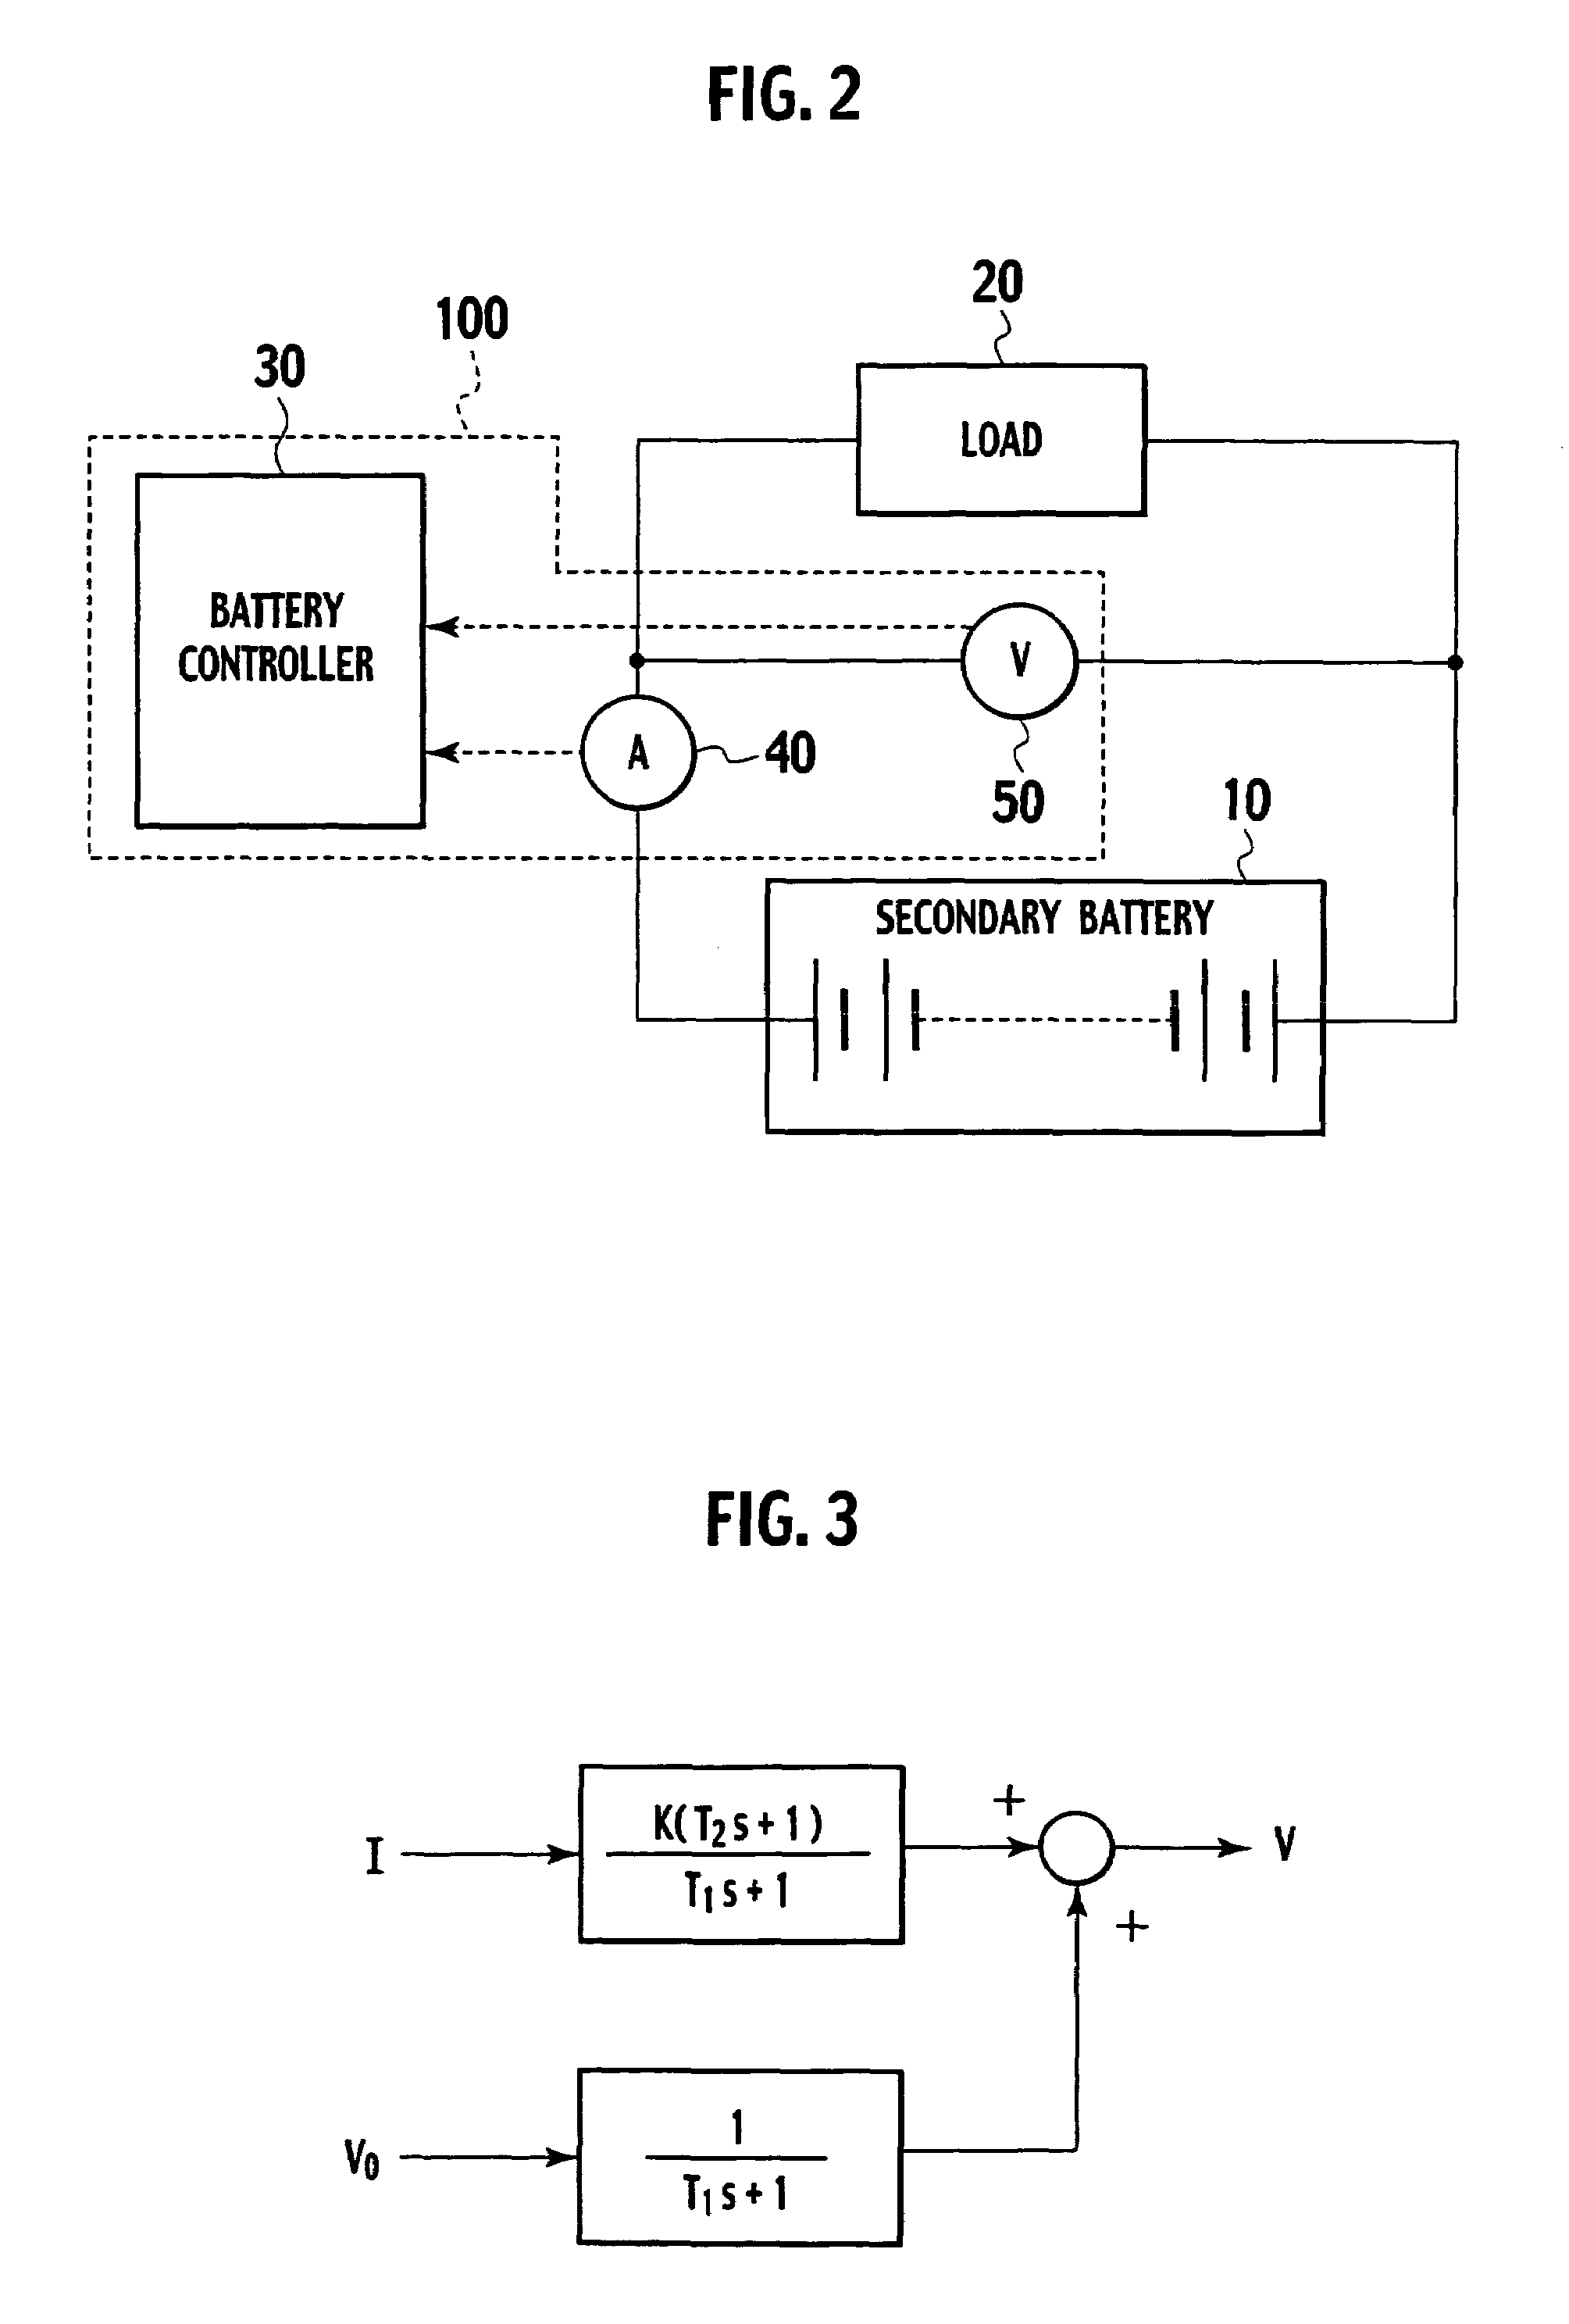 Available input-output power estimating device for secondary battery